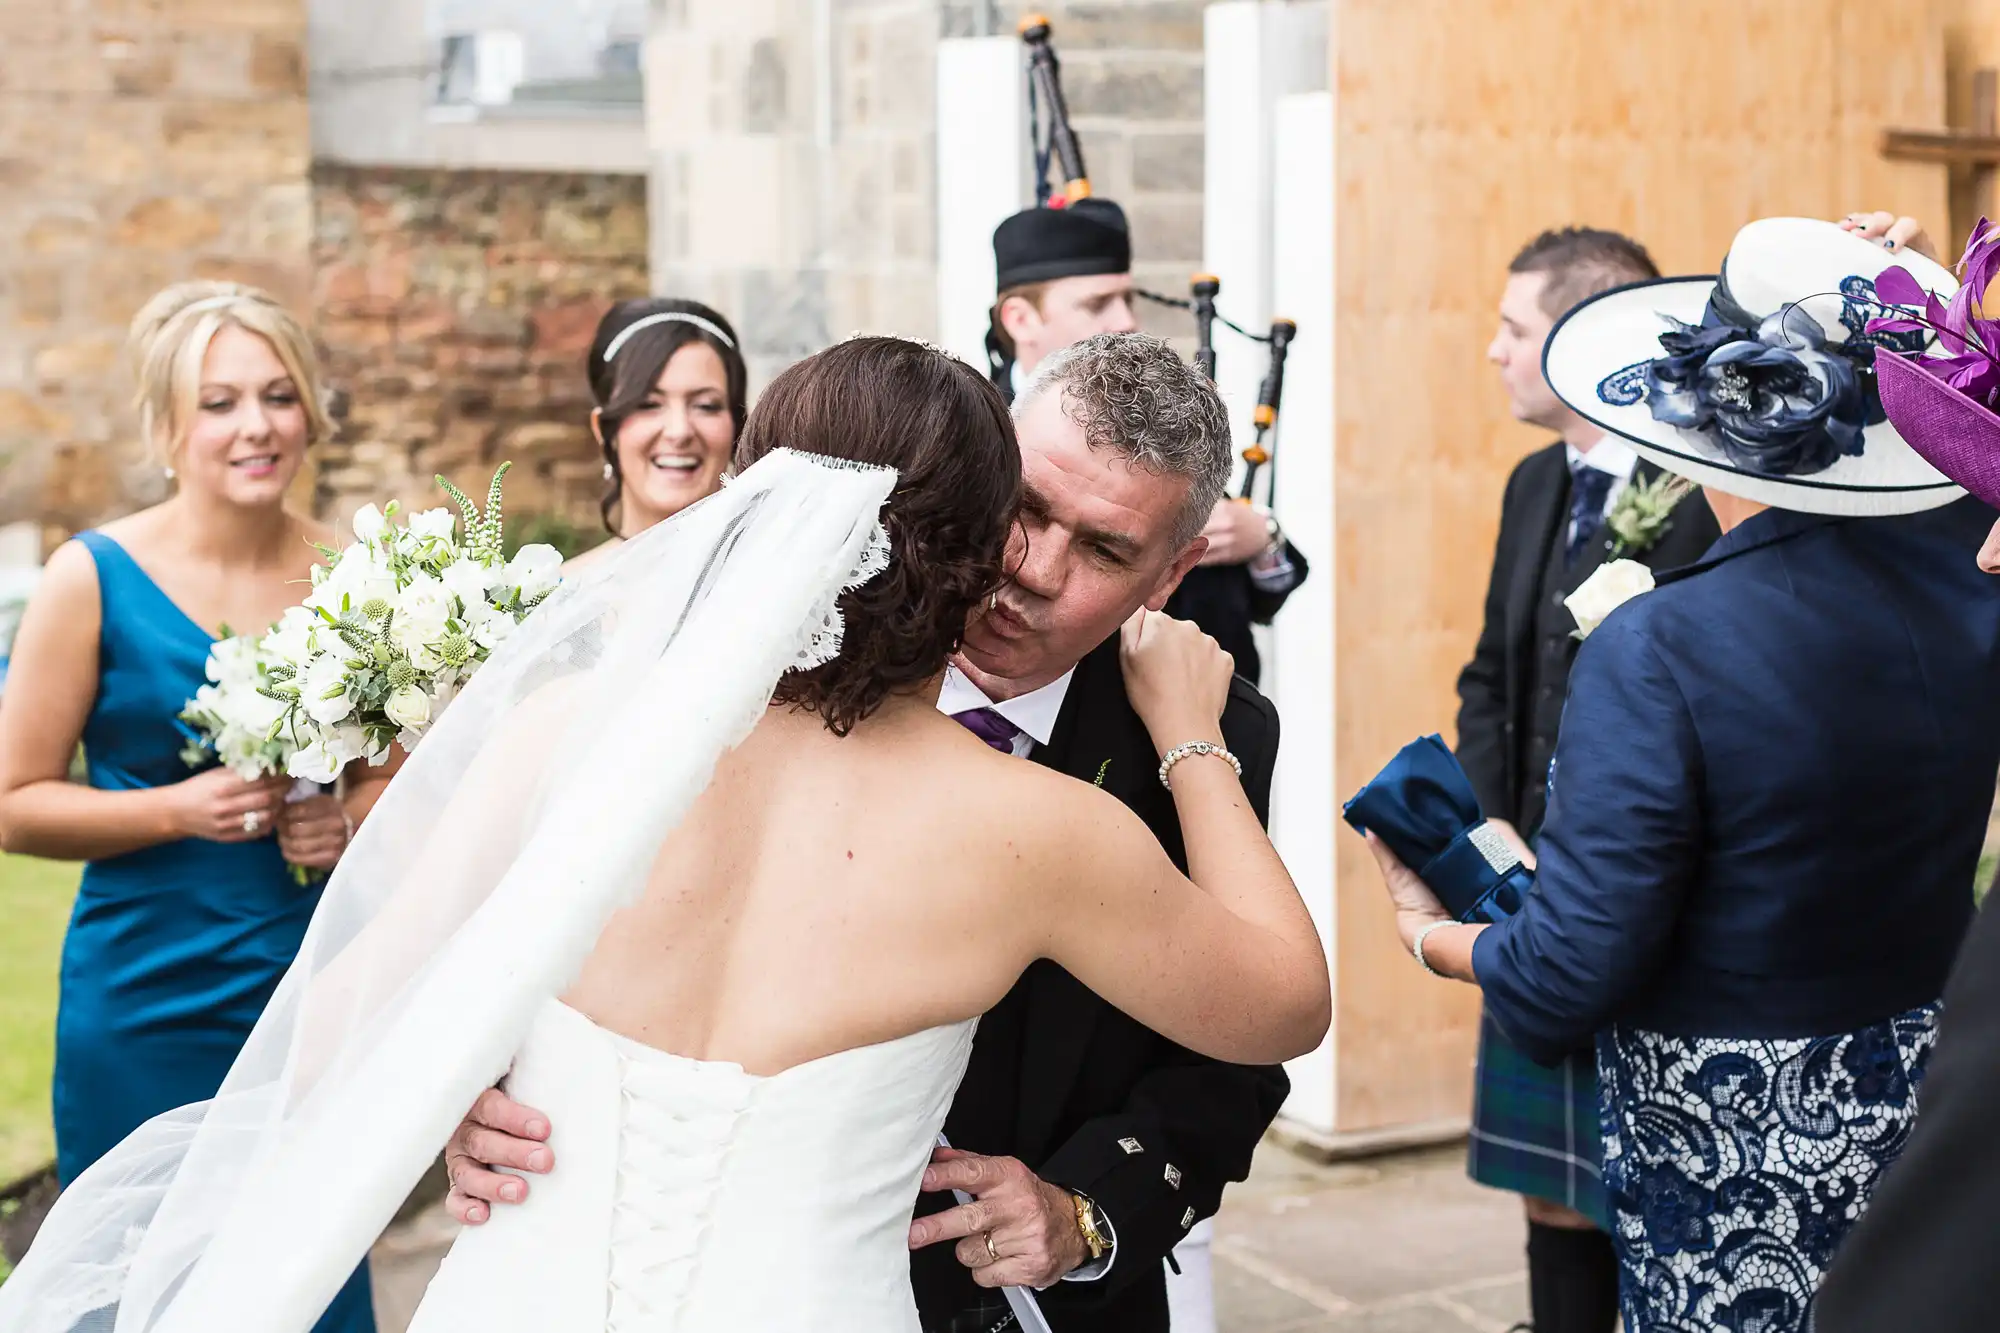 A bride in a white dress embracing a man in a suit at a wedding ceremony, with guests and a bagpiper nearby.